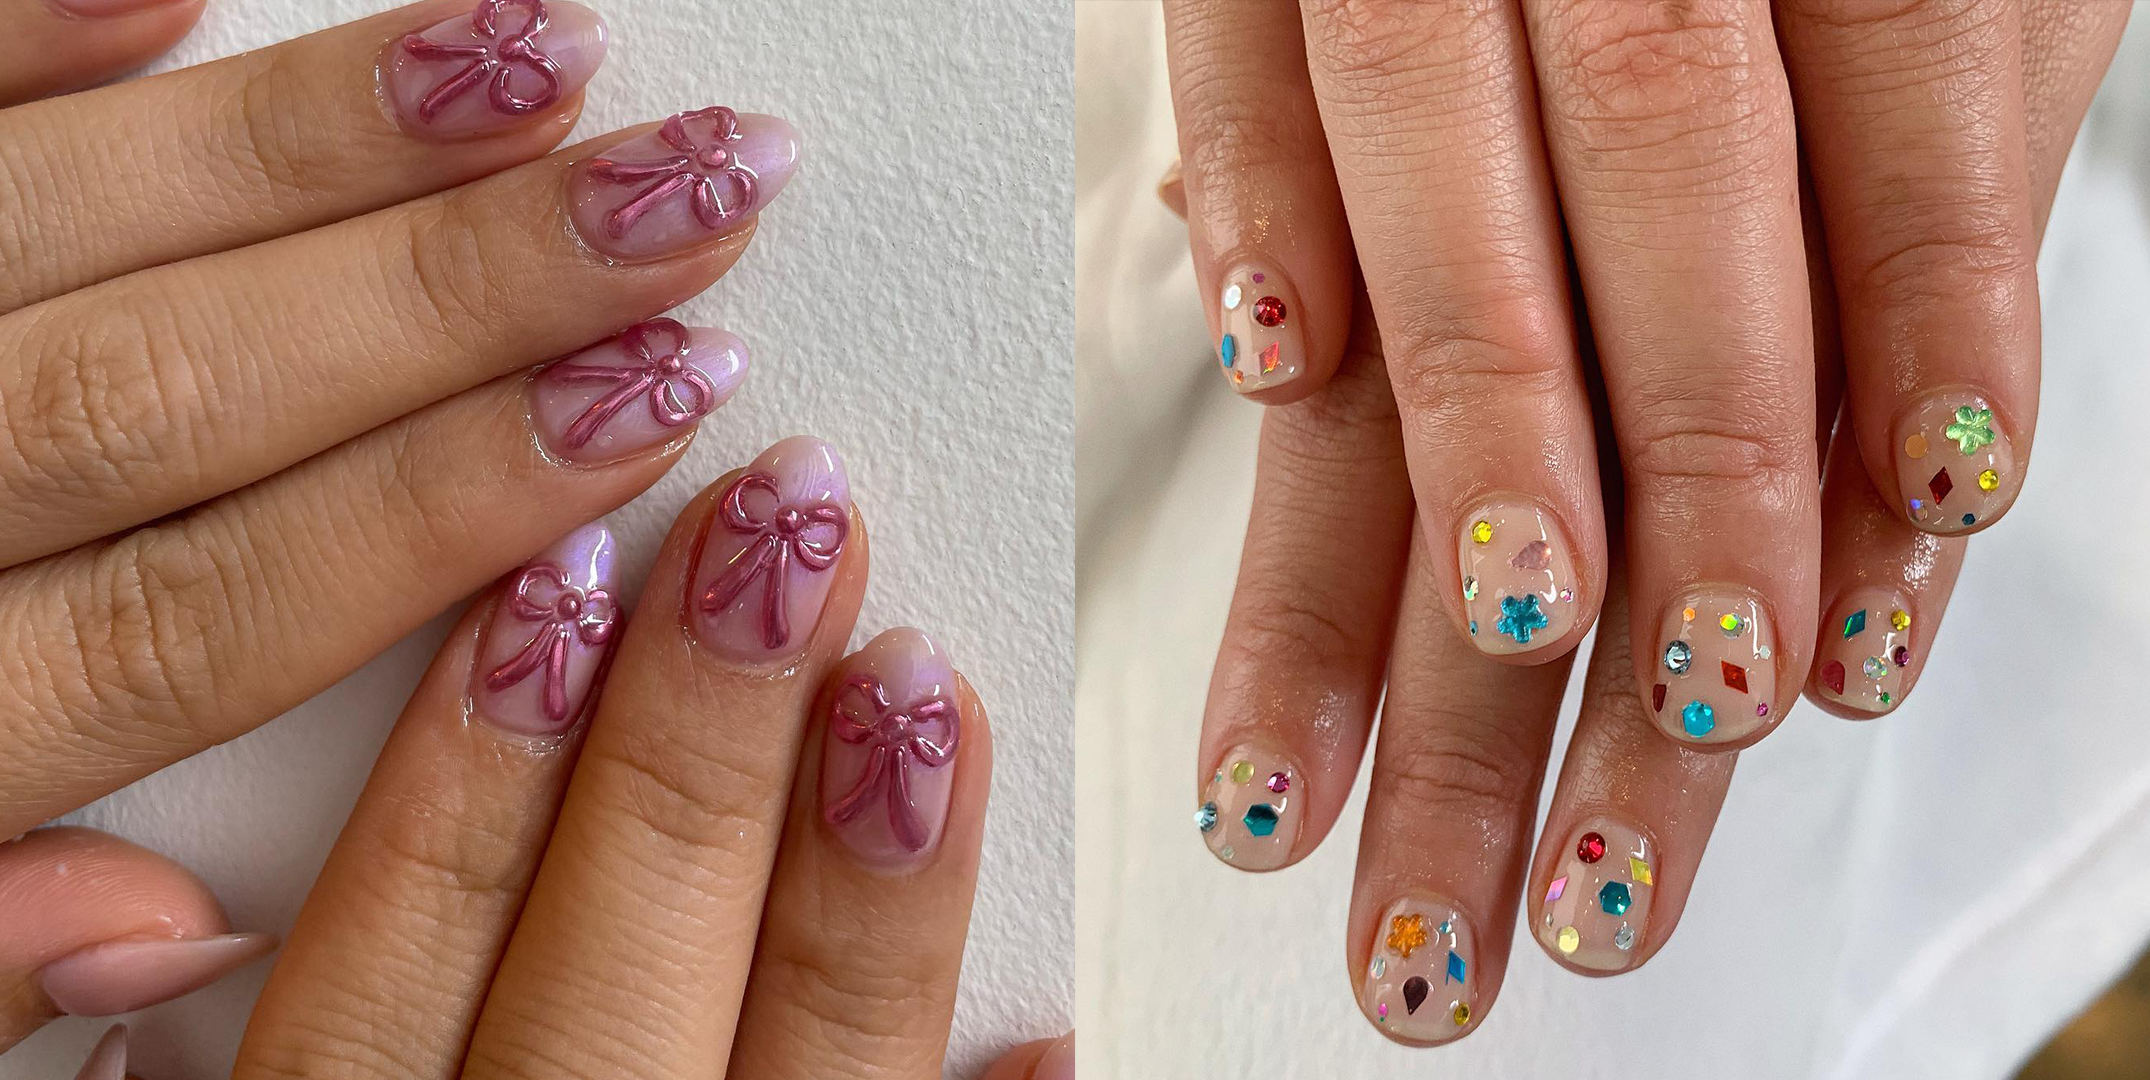 Cute Toe Nail Designs You'll Gush About For Days